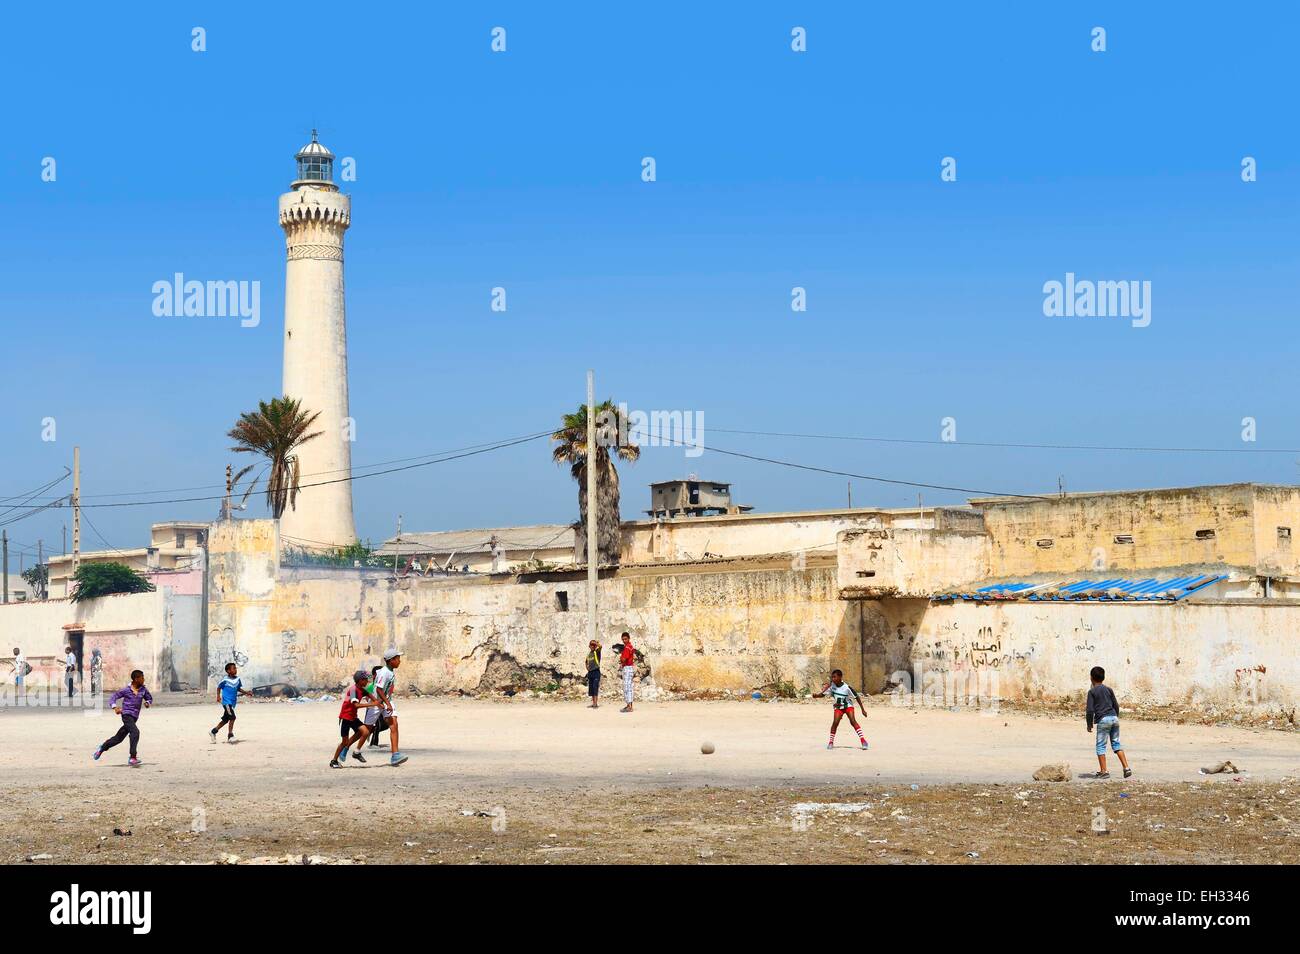 Morocco, Casablanca, children playing football in the popular area of El Hank lighthouse Stock Photo